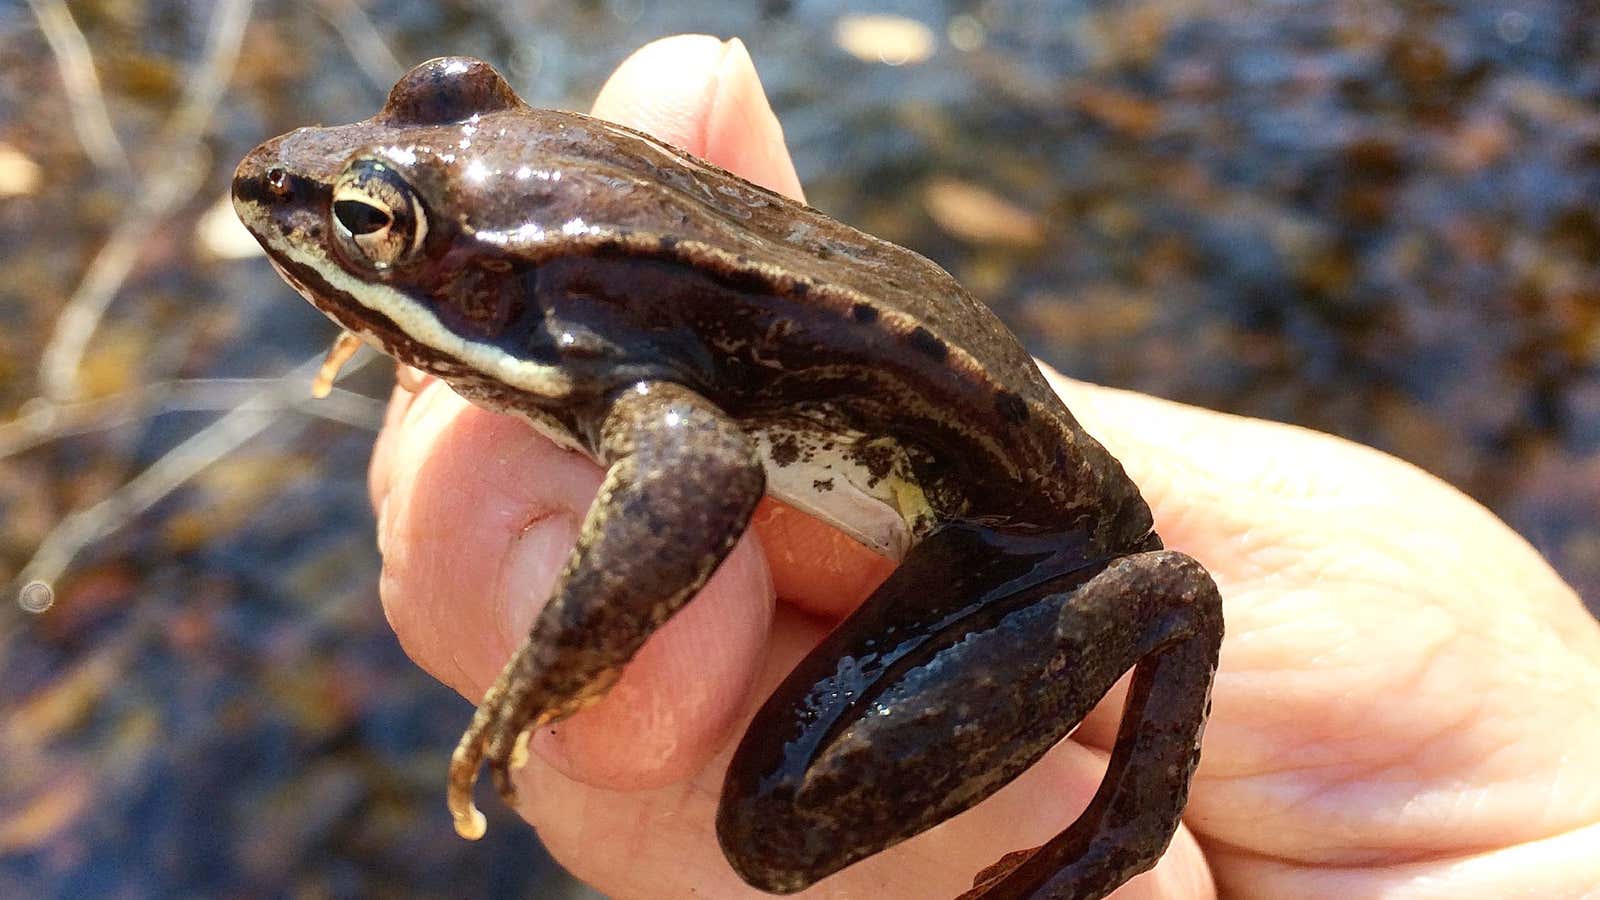 A common North American poop-frog.